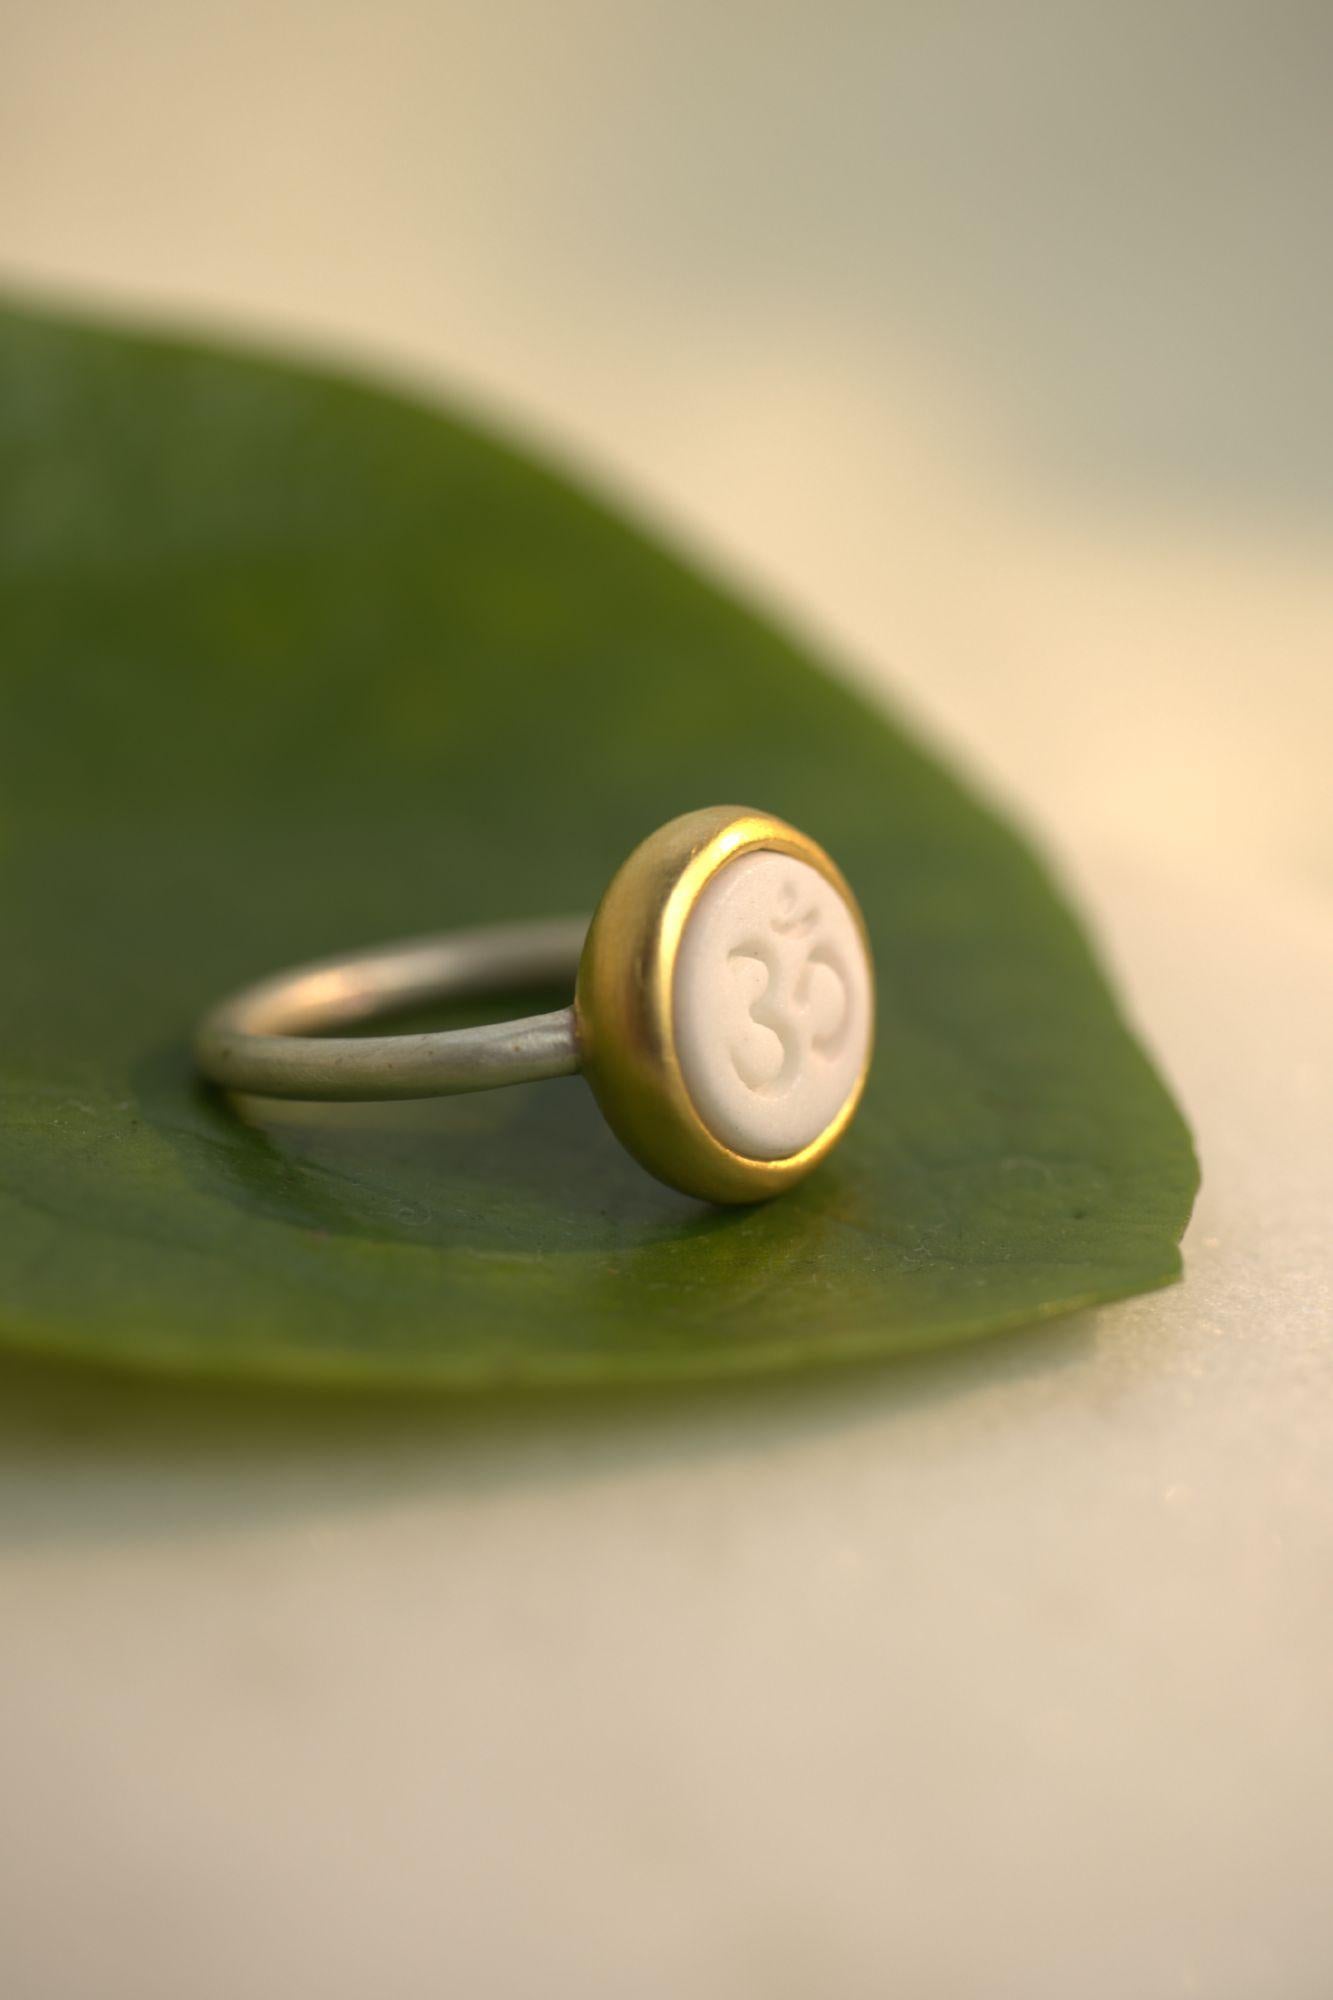 For Sale:  Monika Herré Porcelain Ring Ohm Symbol Small sterling silver gold-plated 4